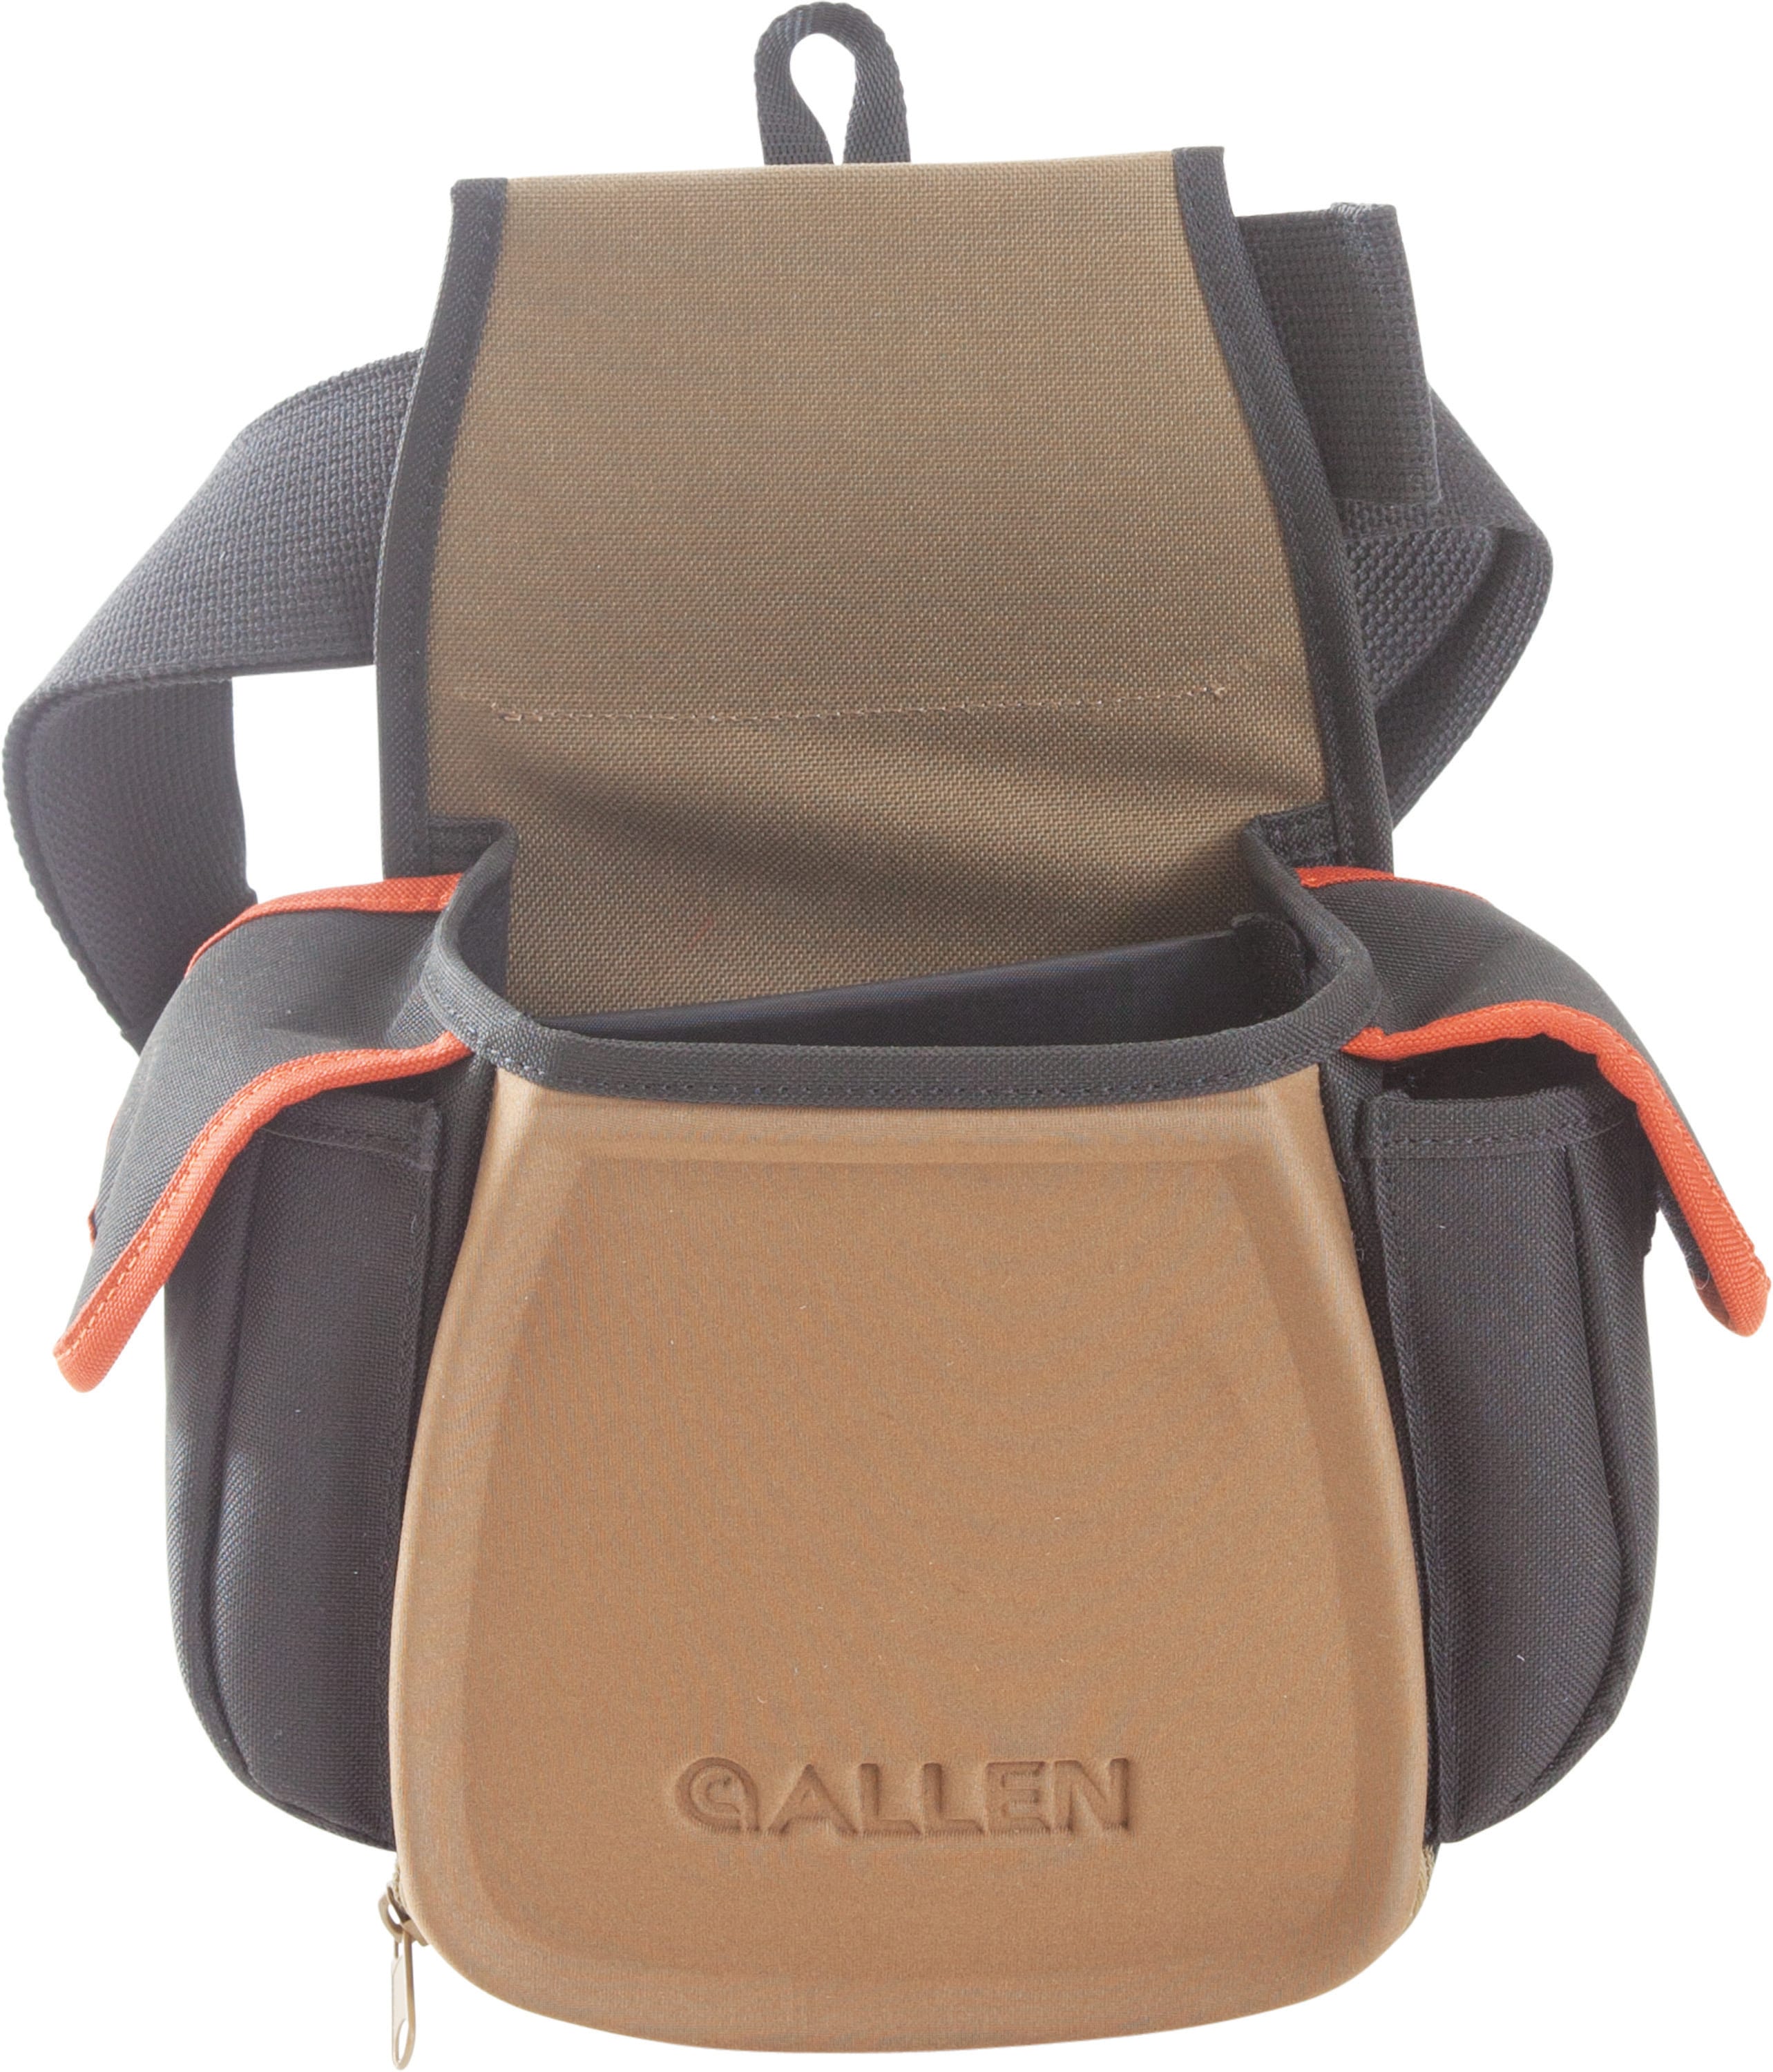 Allen Company Range Bag in the Hunting Equipment & Apparel department at